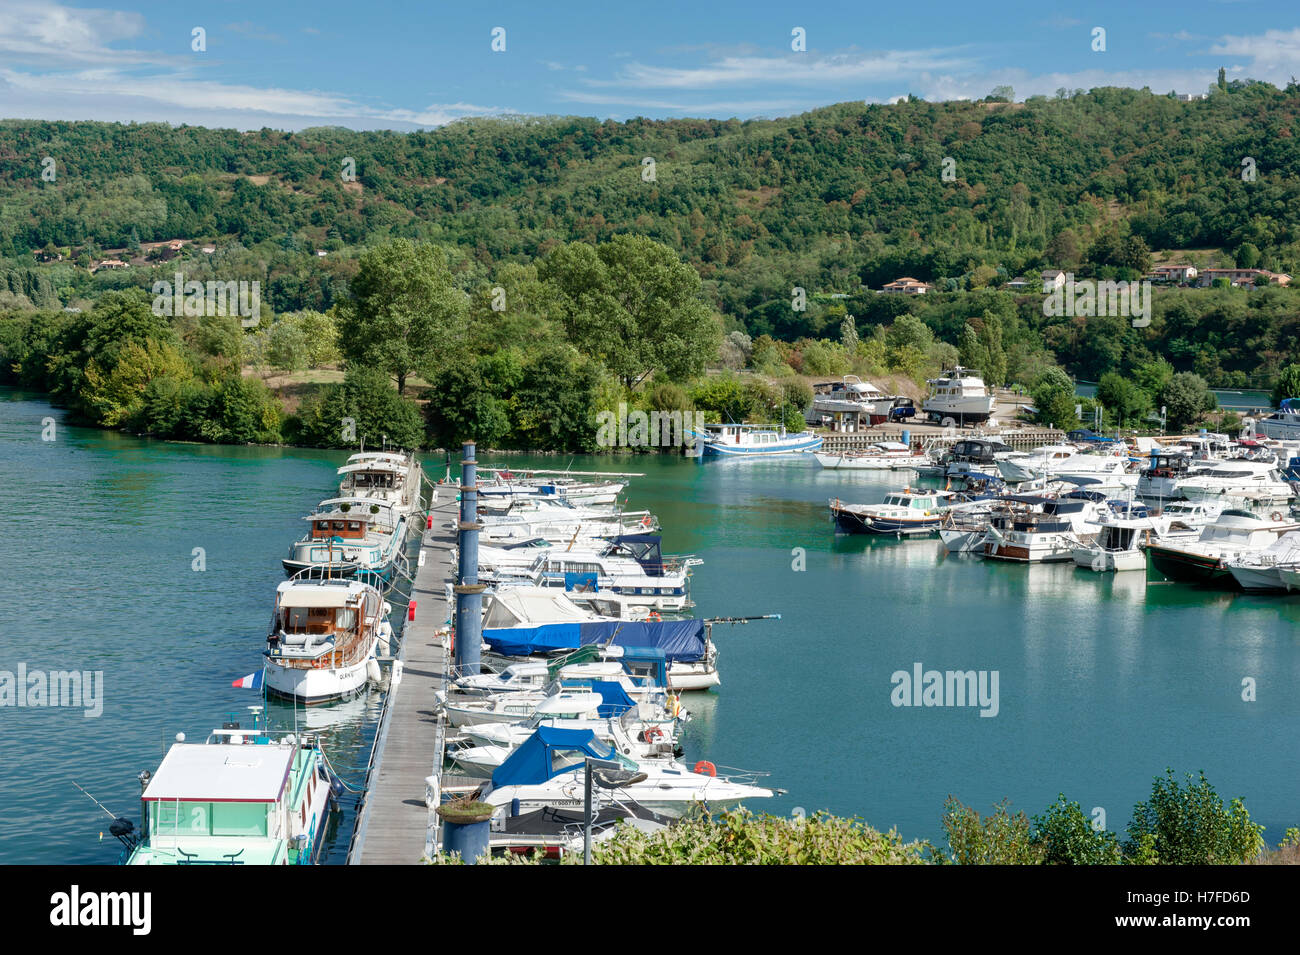 Pleasure craft moored in the marina of Les-Roches-de-Condrieu on the left banks of the Rhône river in Isère, France Stock Photo